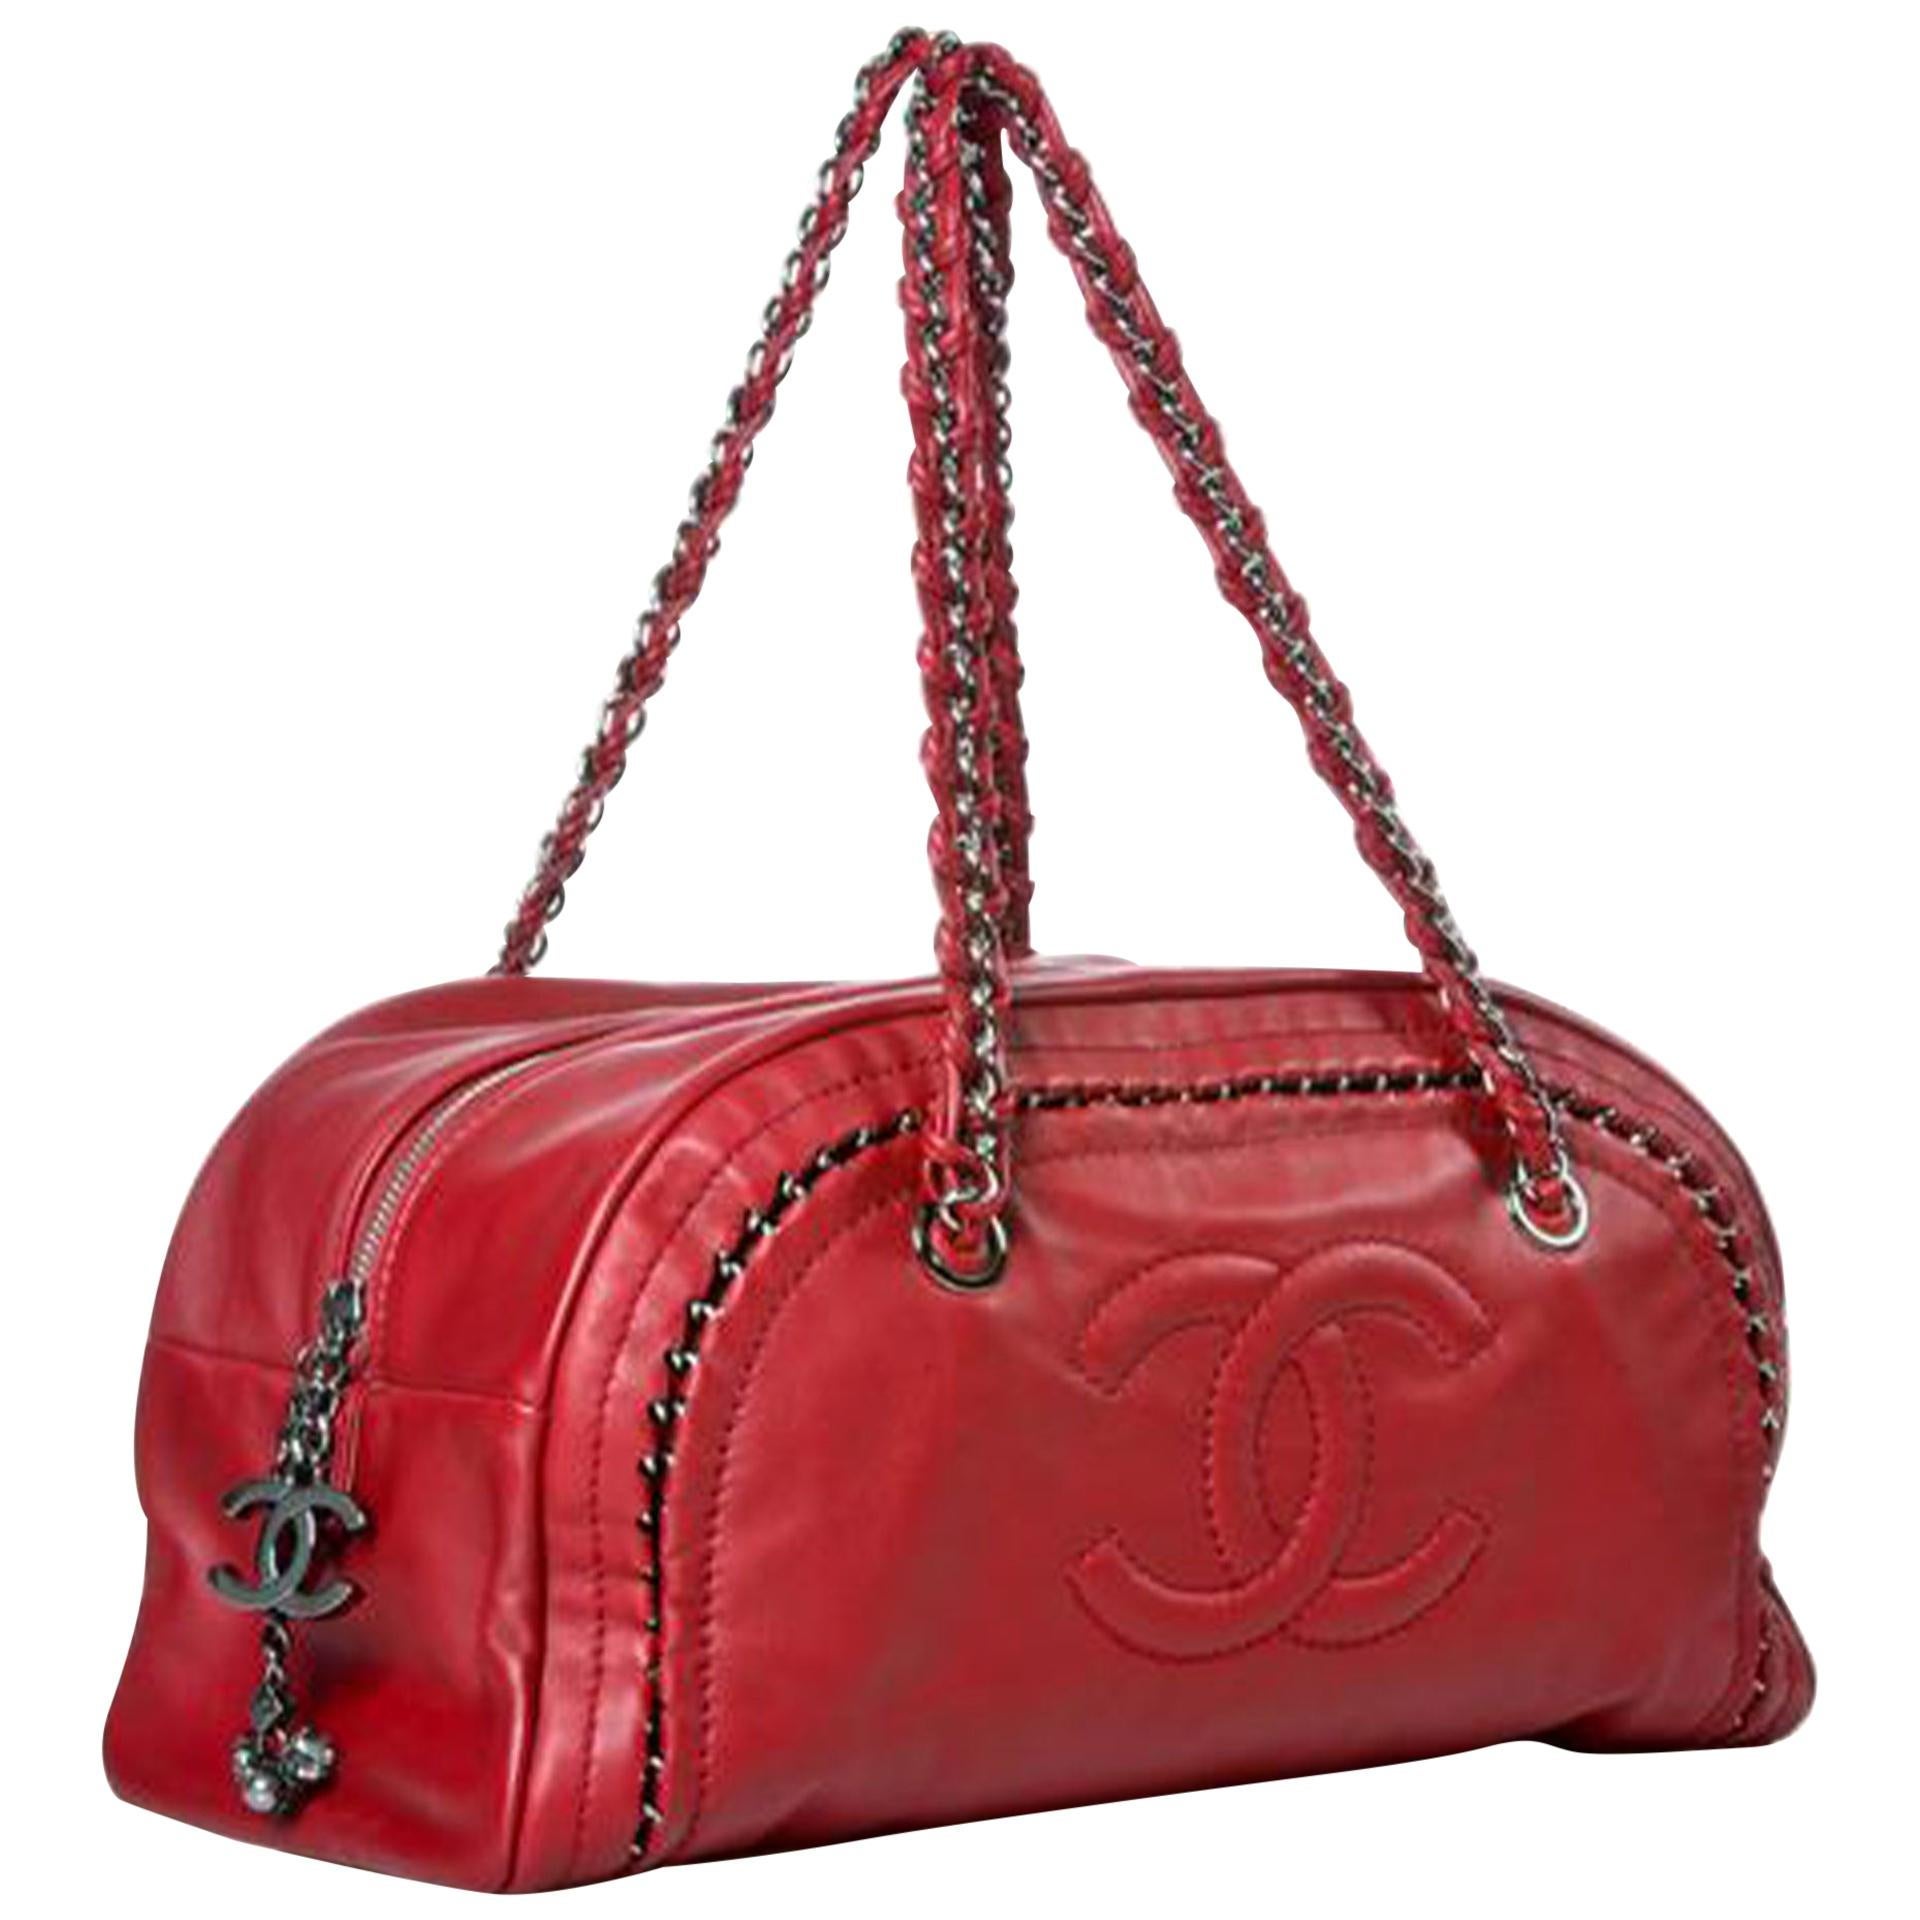 Chanel Bowling Bag Luxury Ligne Leather As Seen On Ivanka Trump Red Lambskin Bag